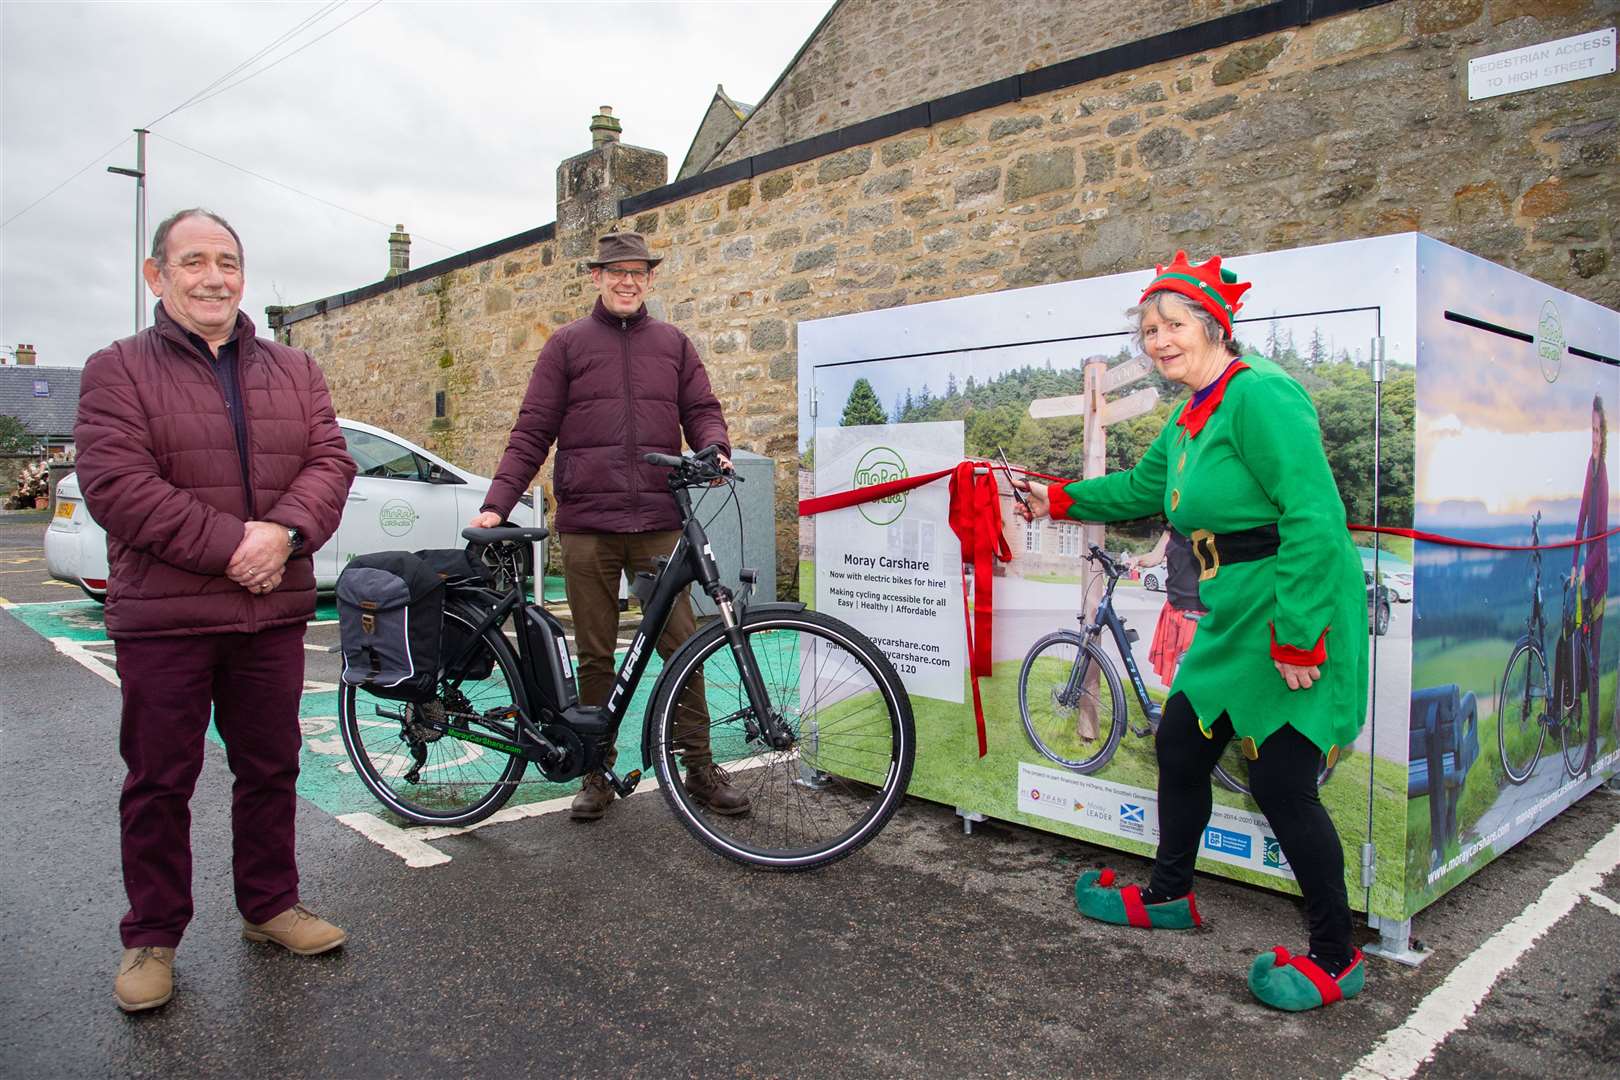 Forres Councillor Lorna Creswell (Right) is joined by Alastair Kennedy (Left) Chairman of the LEADER Local Action Group and Gordon McAlpine (Centre) Manager of Moray Car Share at the offical launch of the new electric bike shelter at Tulloch Car Park, Forres...Picture: Daniel Forsyth..